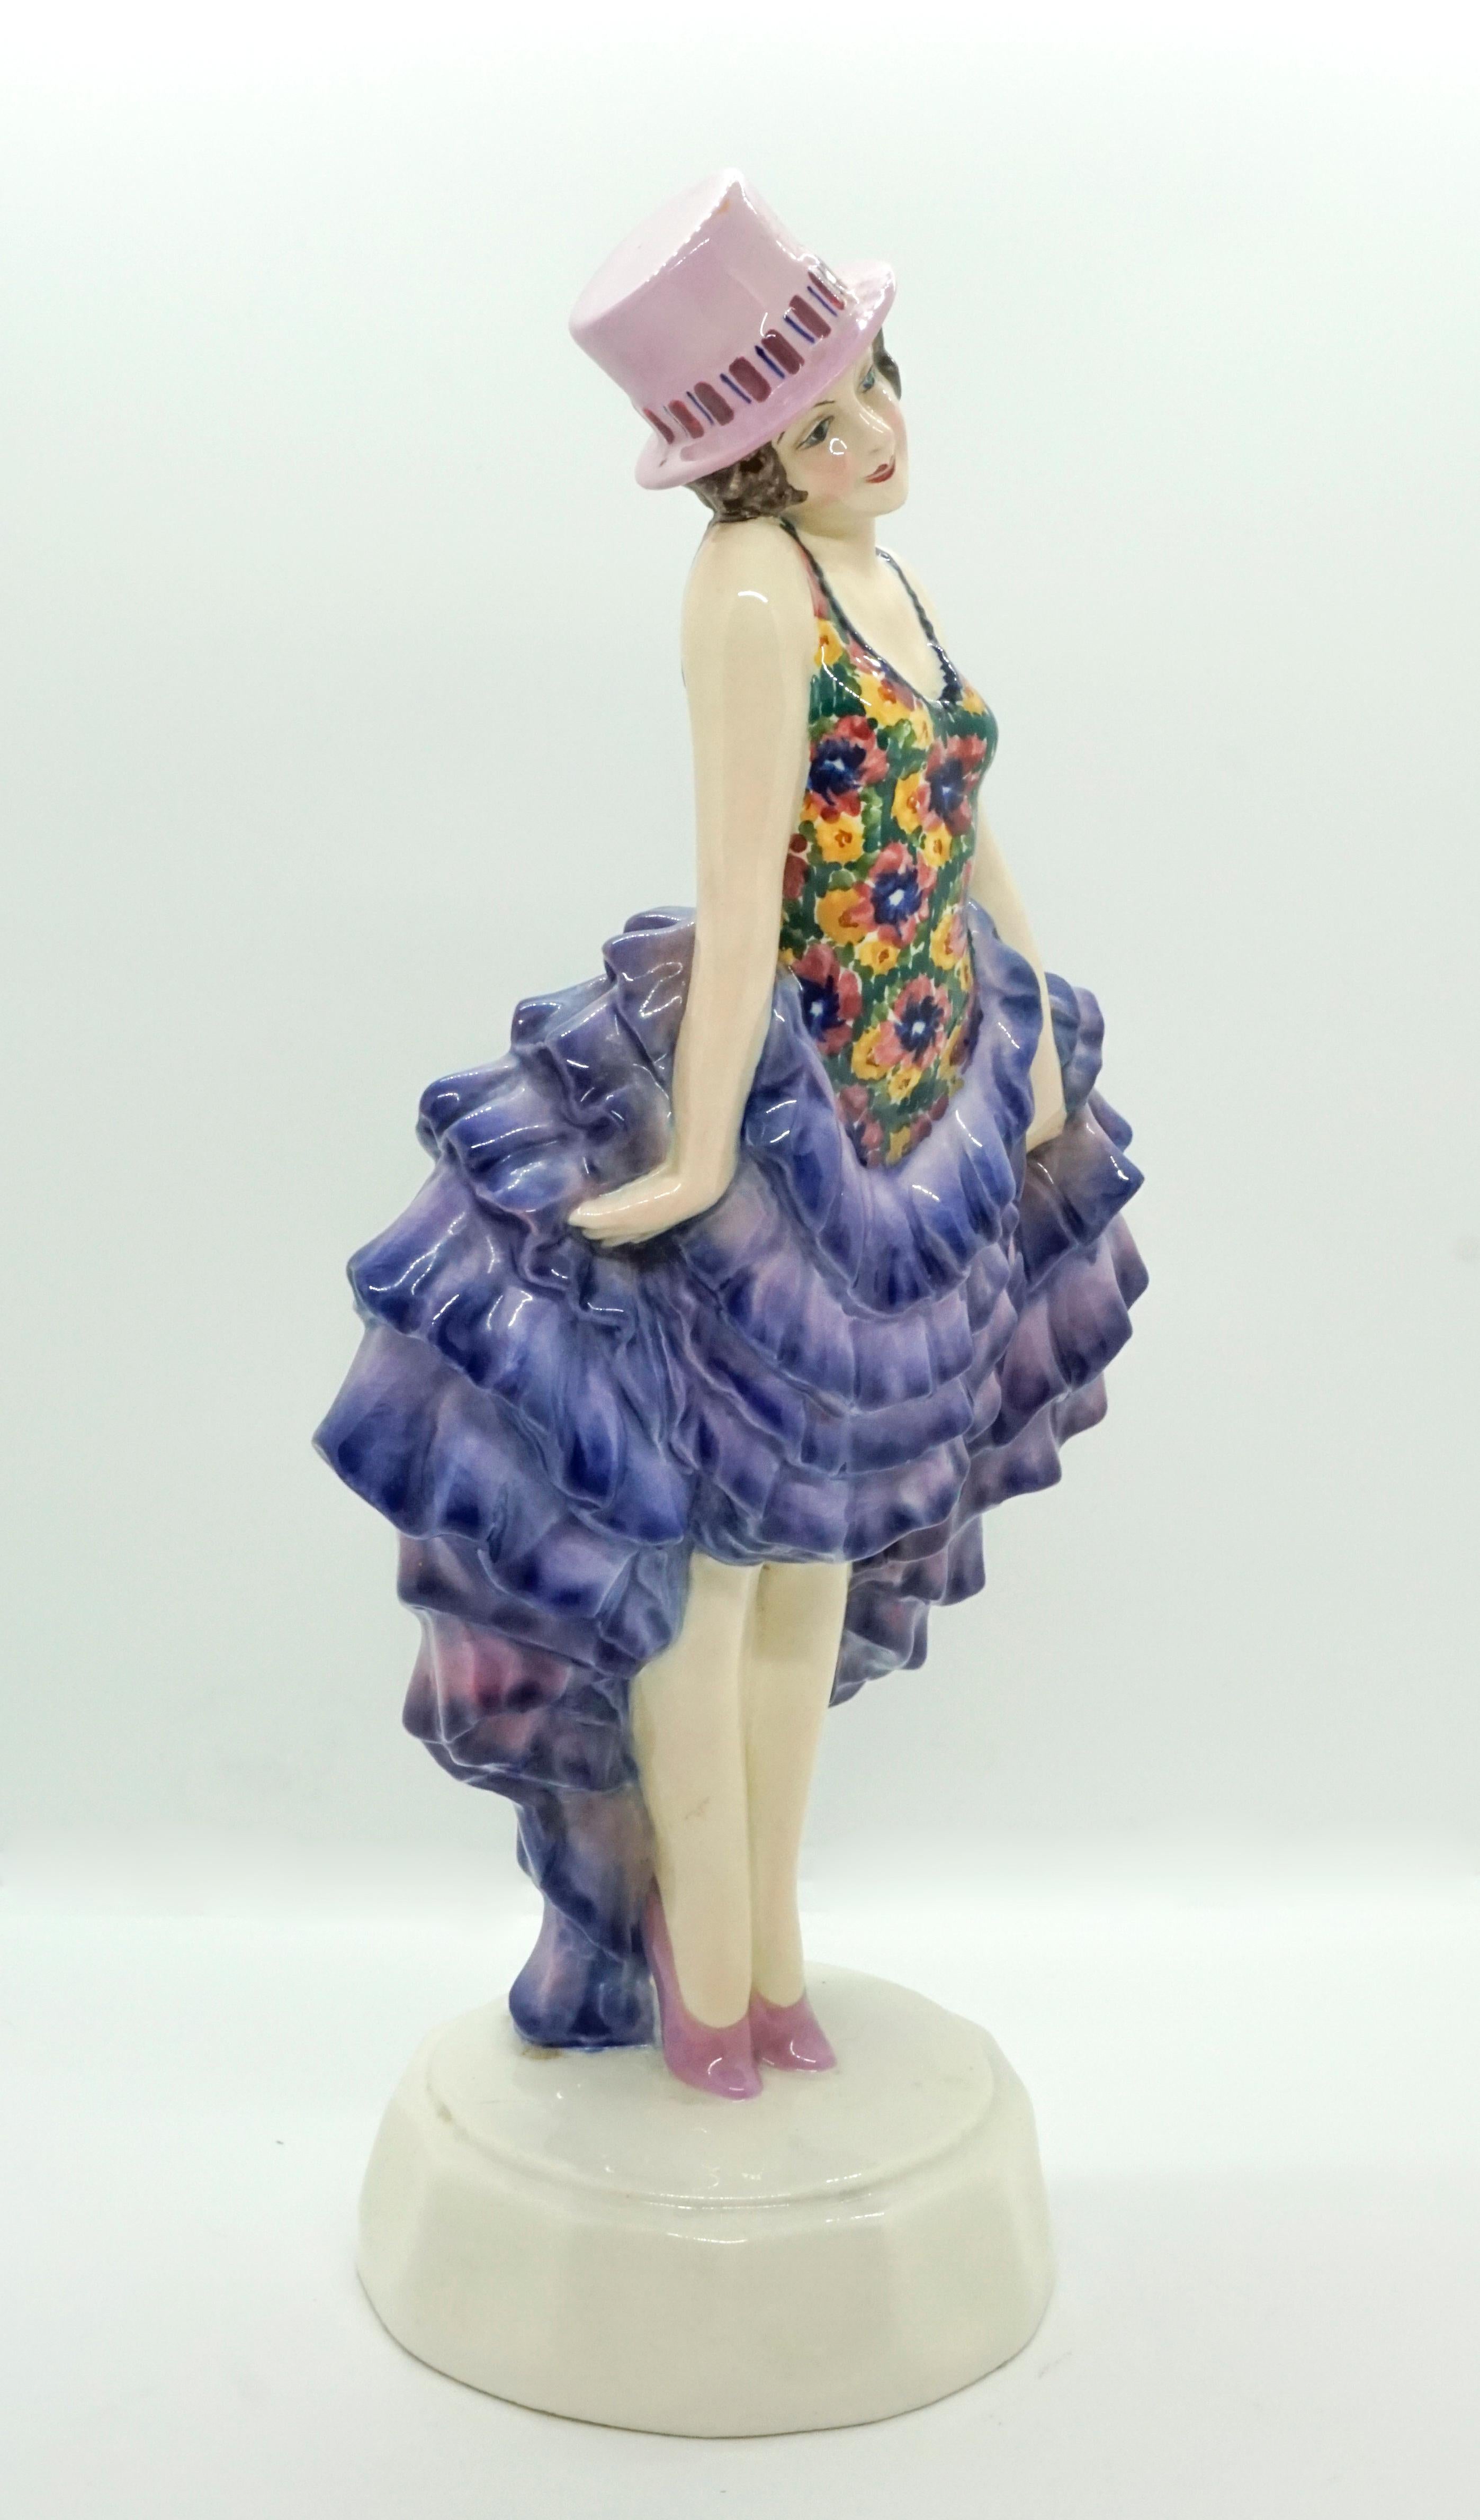 Rare Goldscheider figure of the 1920s.
The standing dancer wears a pink cylinder hat on her short brown locks. The flower-patterned top of her costume is tight-fitting and sleeveless. Tilting her head slightly to the right, she pulls up her